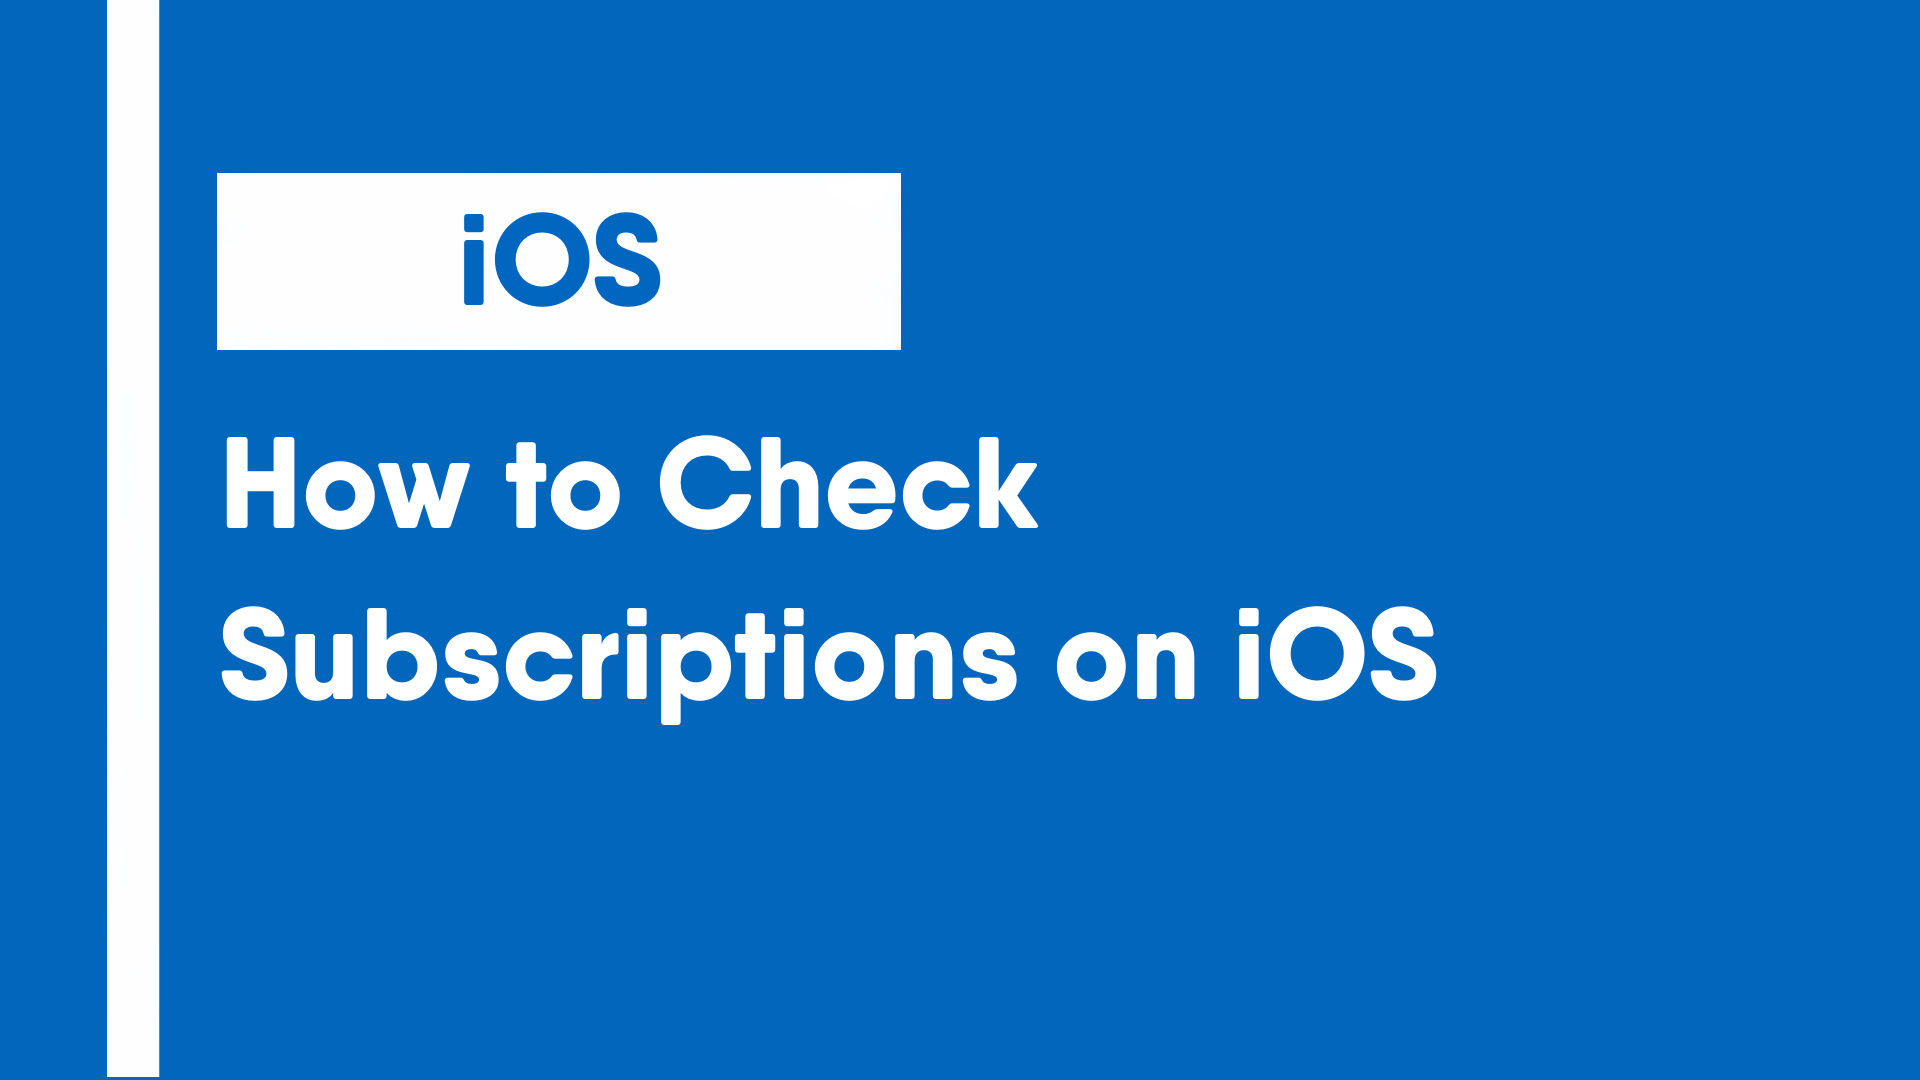 How to Check Subscriptions on iOS